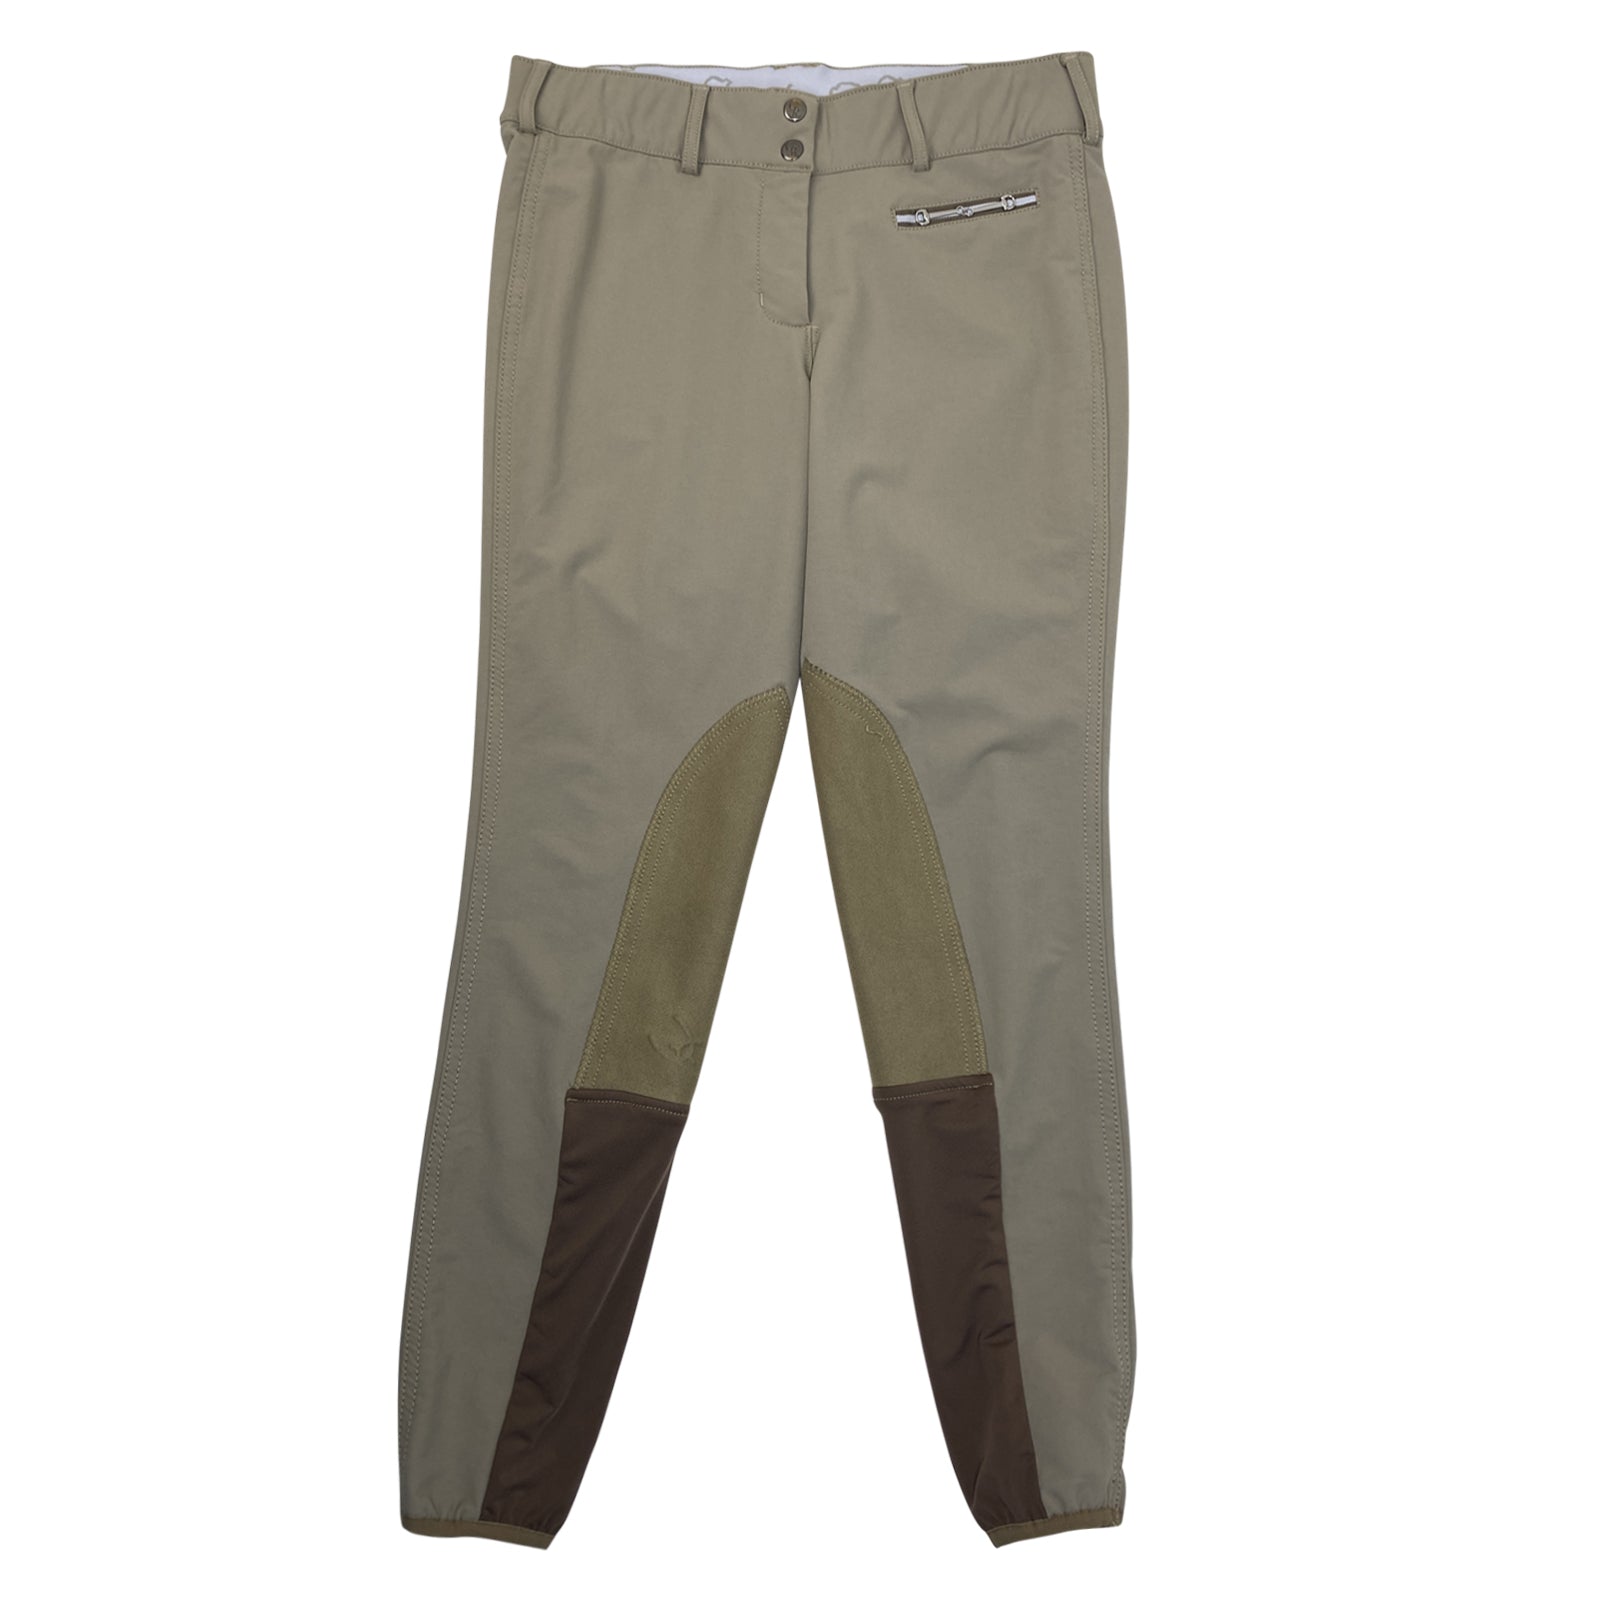 Goode Rider 'Iconic' Breeches in Tan